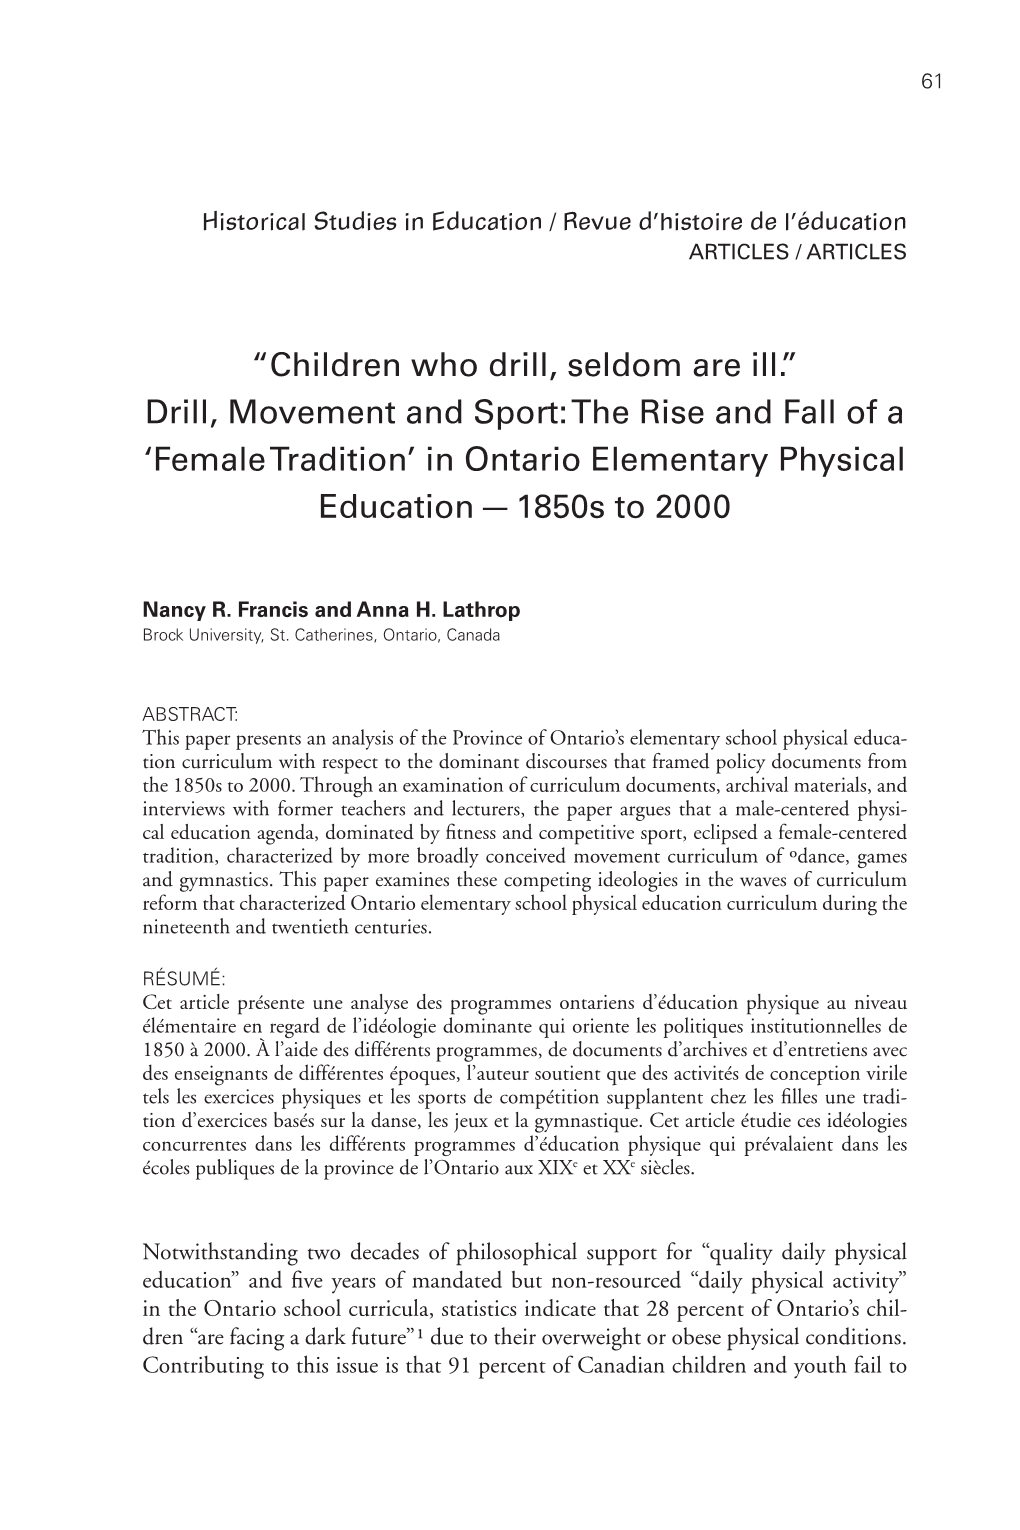 In Ontario Elementary Physical Education — 1850S to 2000